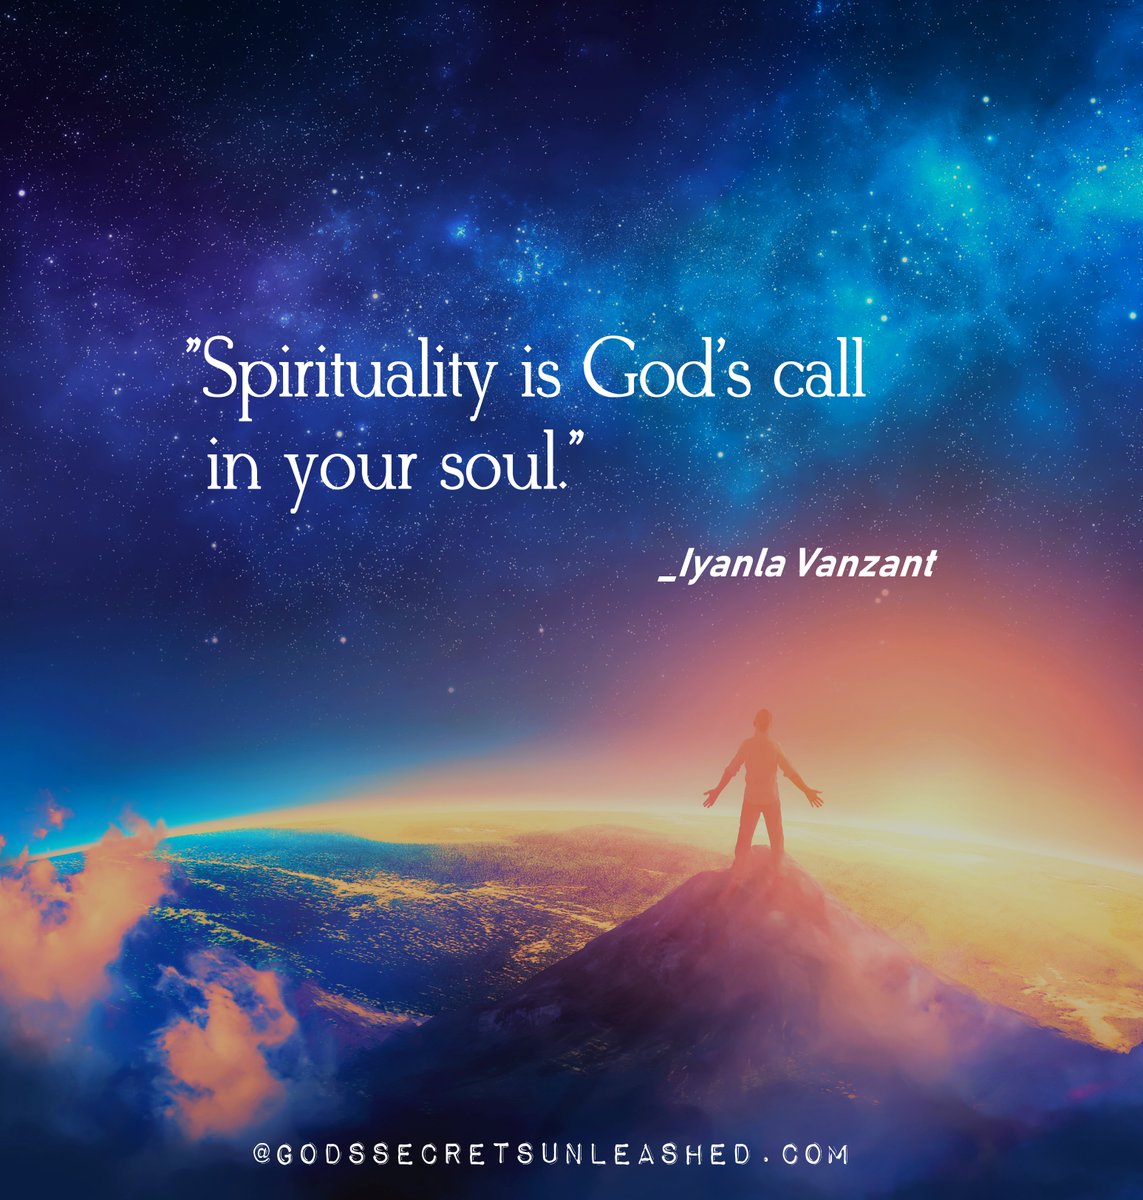 'Spirituality is God's call in your soul.'
_Iyanla Vanzant #spirituality #divine #universal #energy #Source #creation #soul #awareness #love #oneness #peace #growth #empowerment